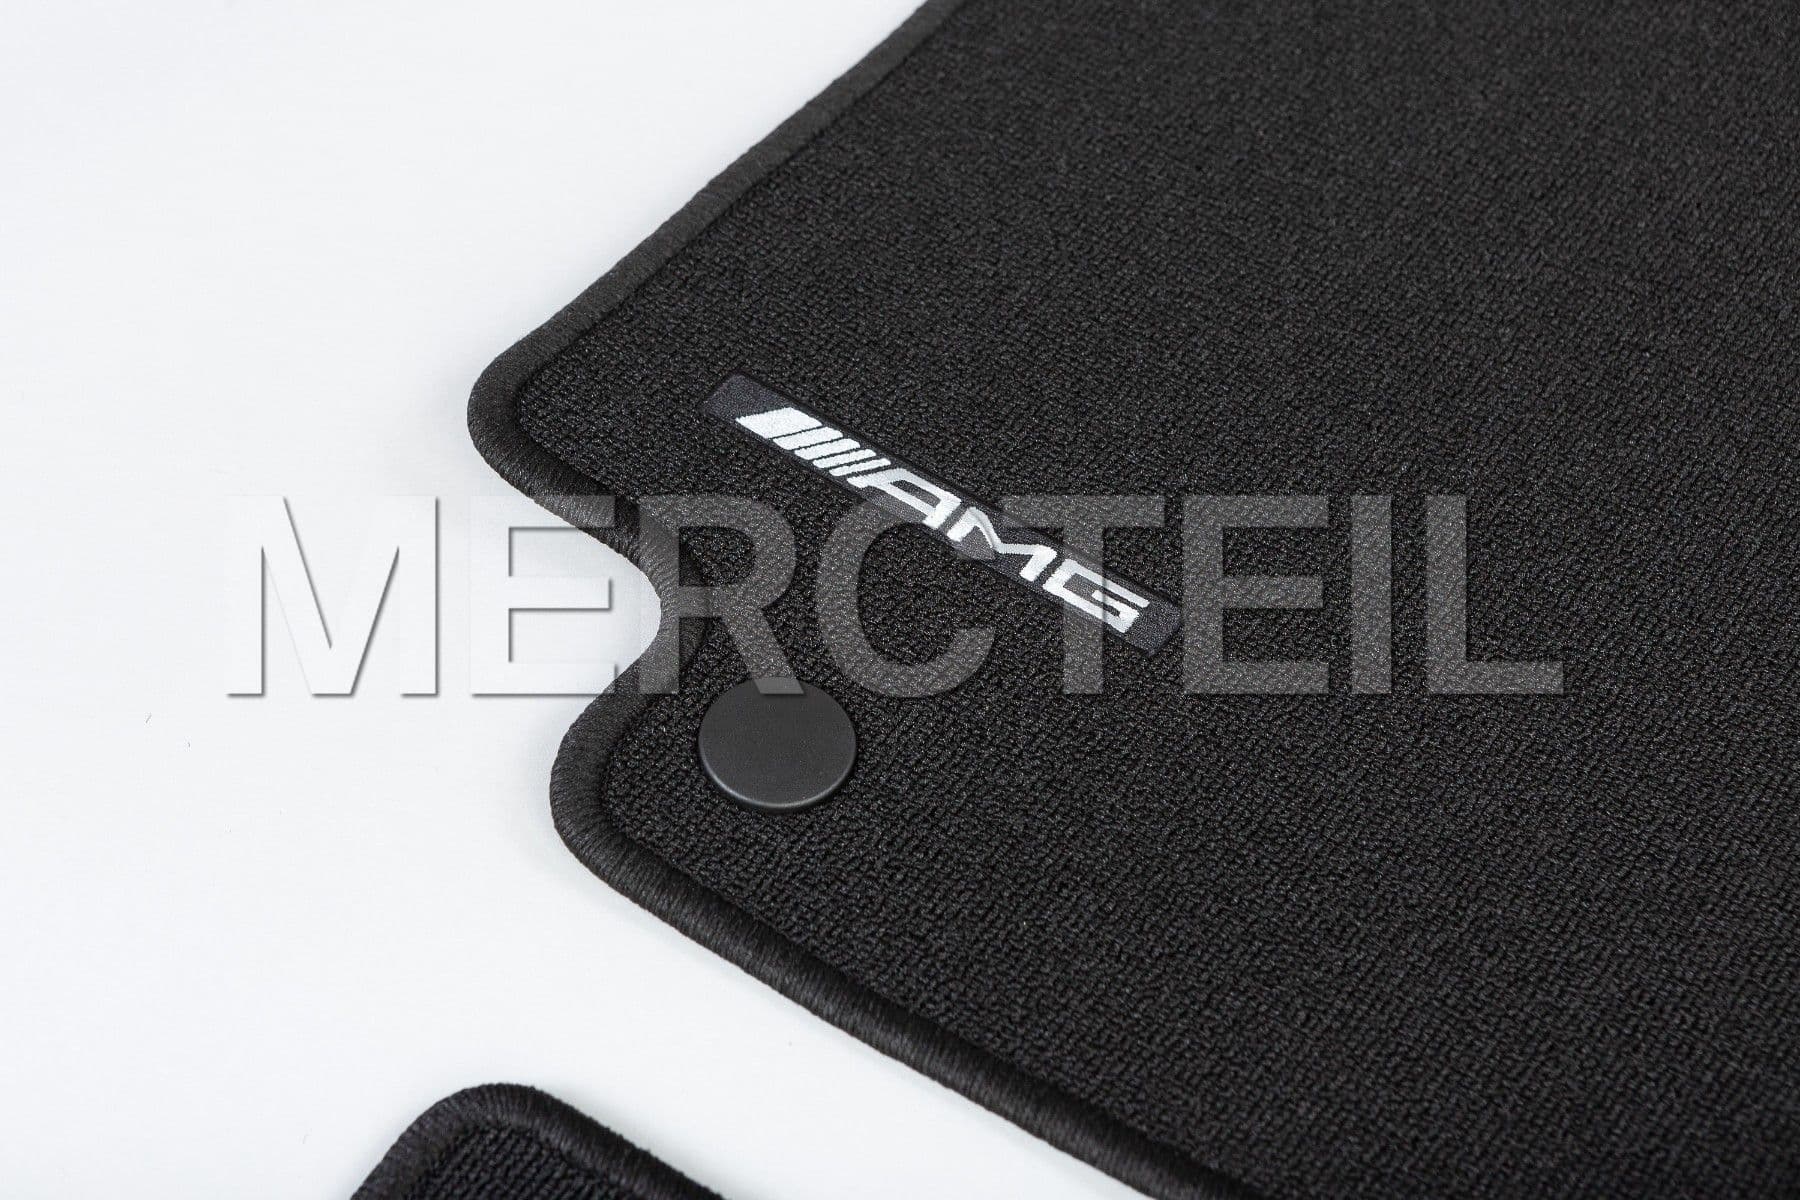 AMG C Class Floor Mats W205 Genuine Mercedes AMG Accessories (part number: A20568060059G63)